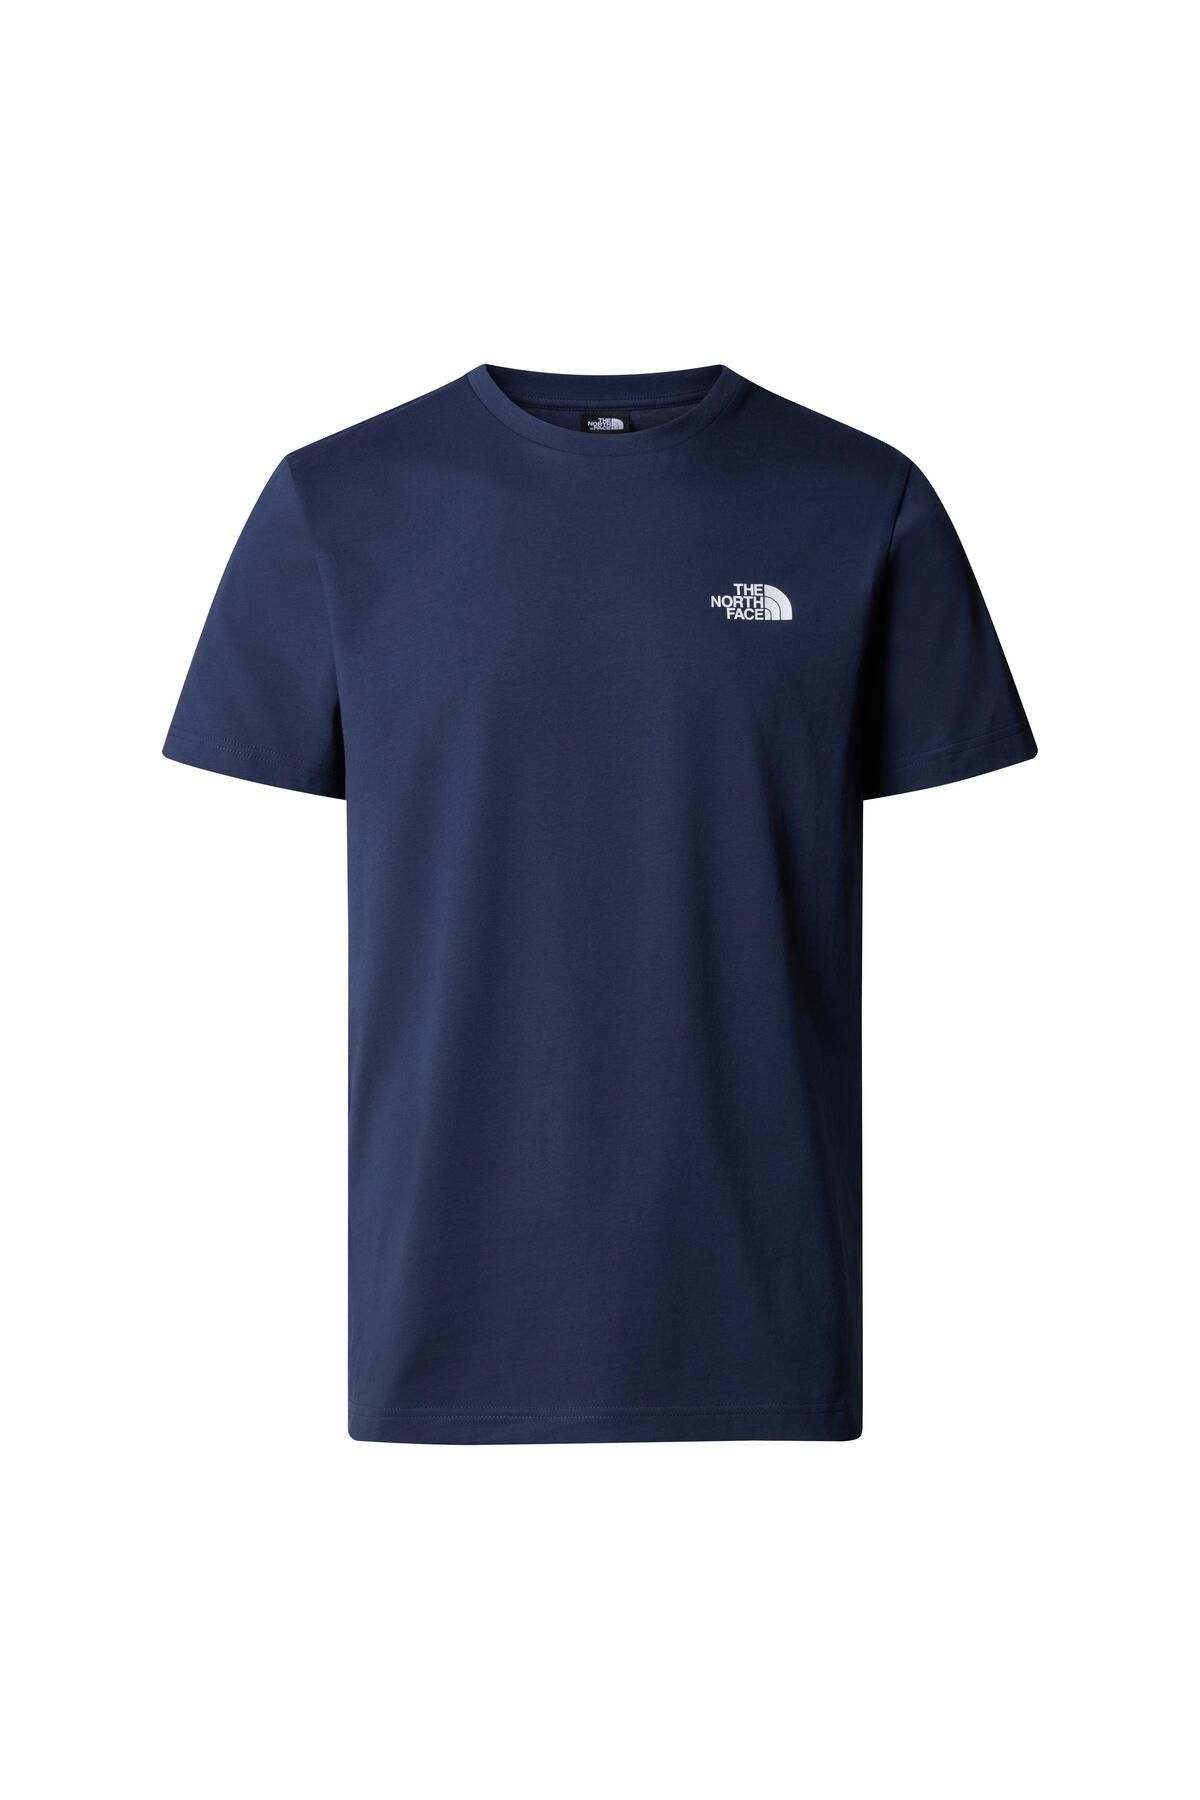 The North Face M S/S SIMPLE DOME TEE